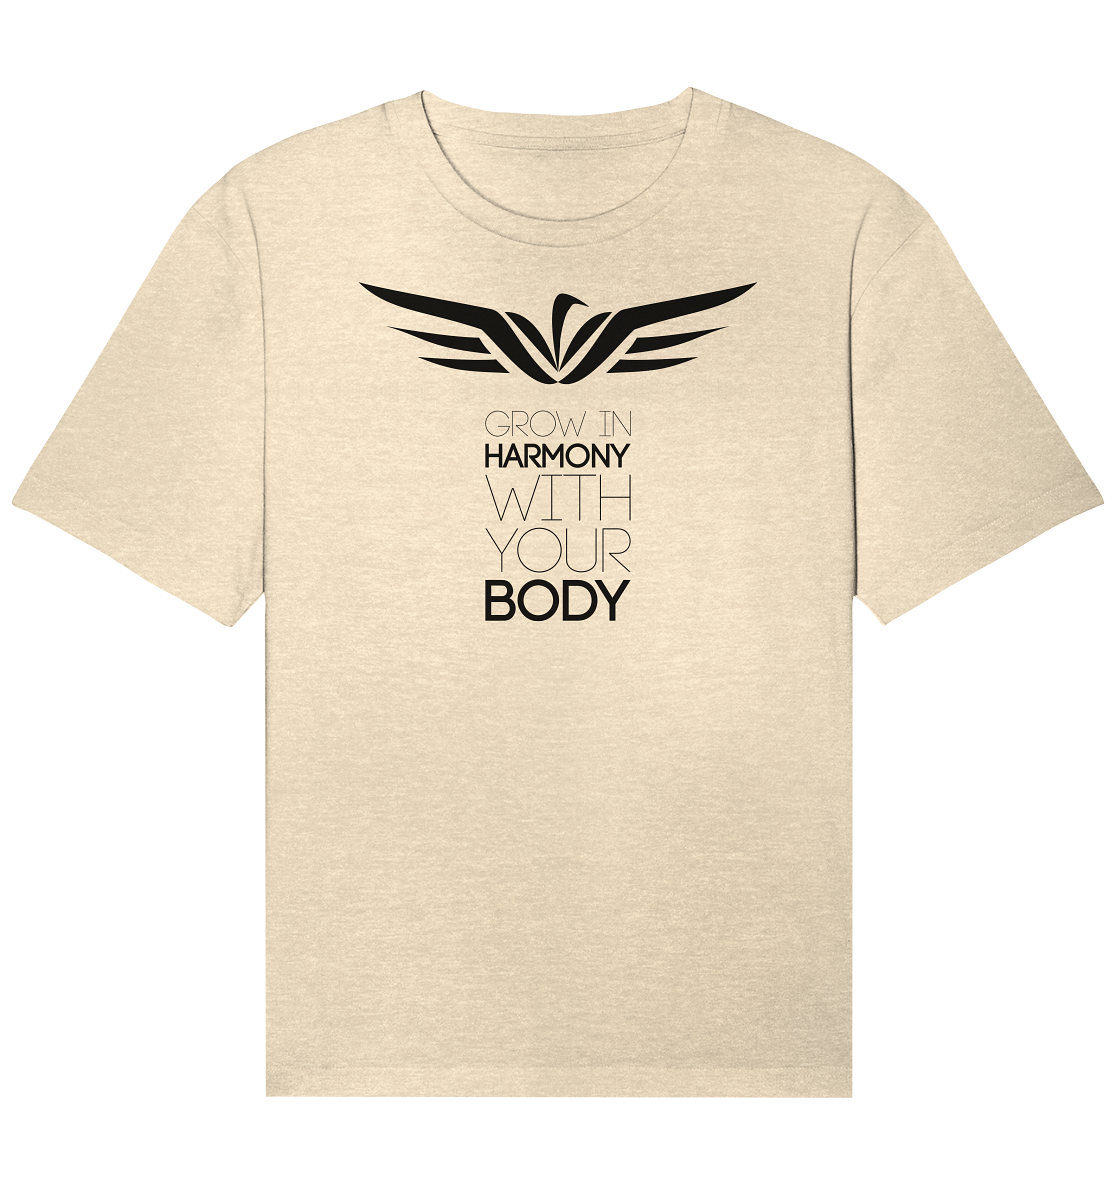 OSA - T shirt casual "Grow in harmony with your body" - Organic Relaxed Shirt